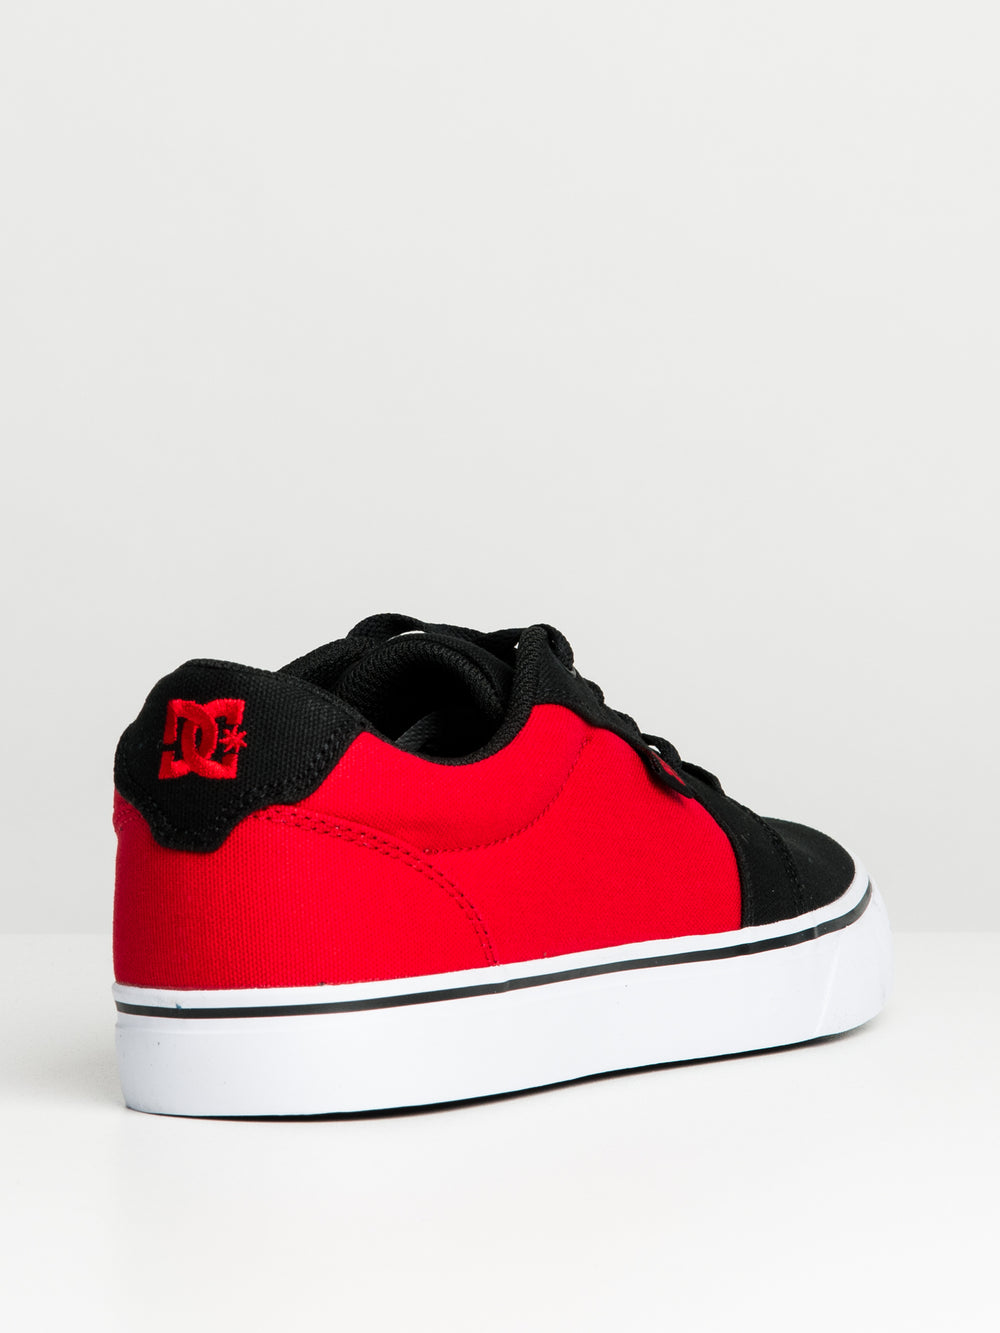 MENS DC SHOES ANVIL SNEAKER - CLEARANCE